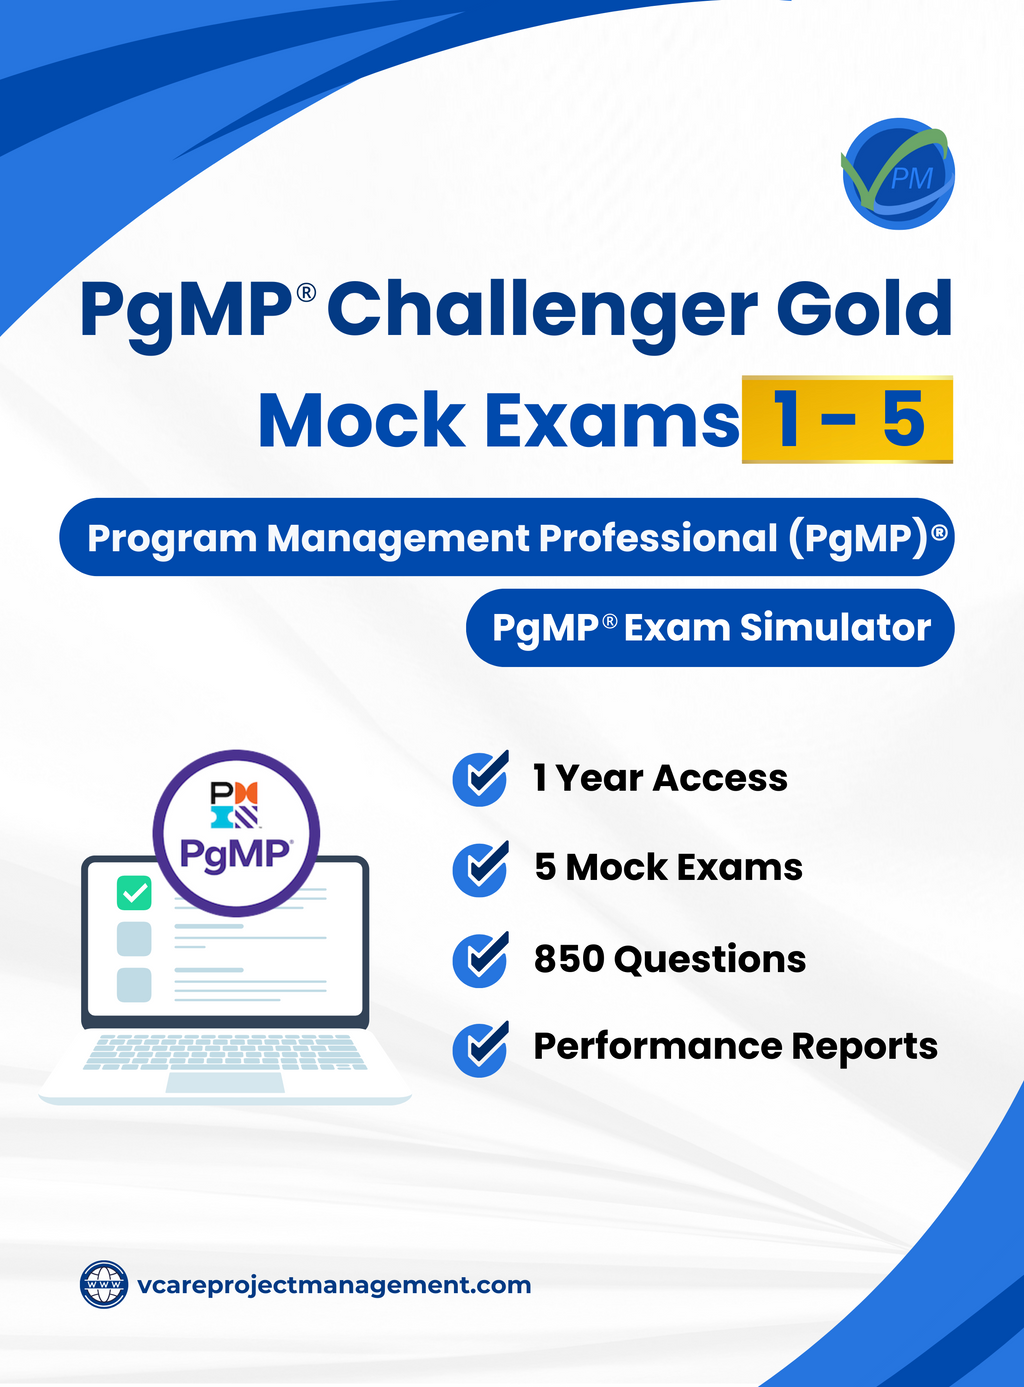 PgMP Challenger Gold (Mock Exams 1 to 5) - 1 Year Access